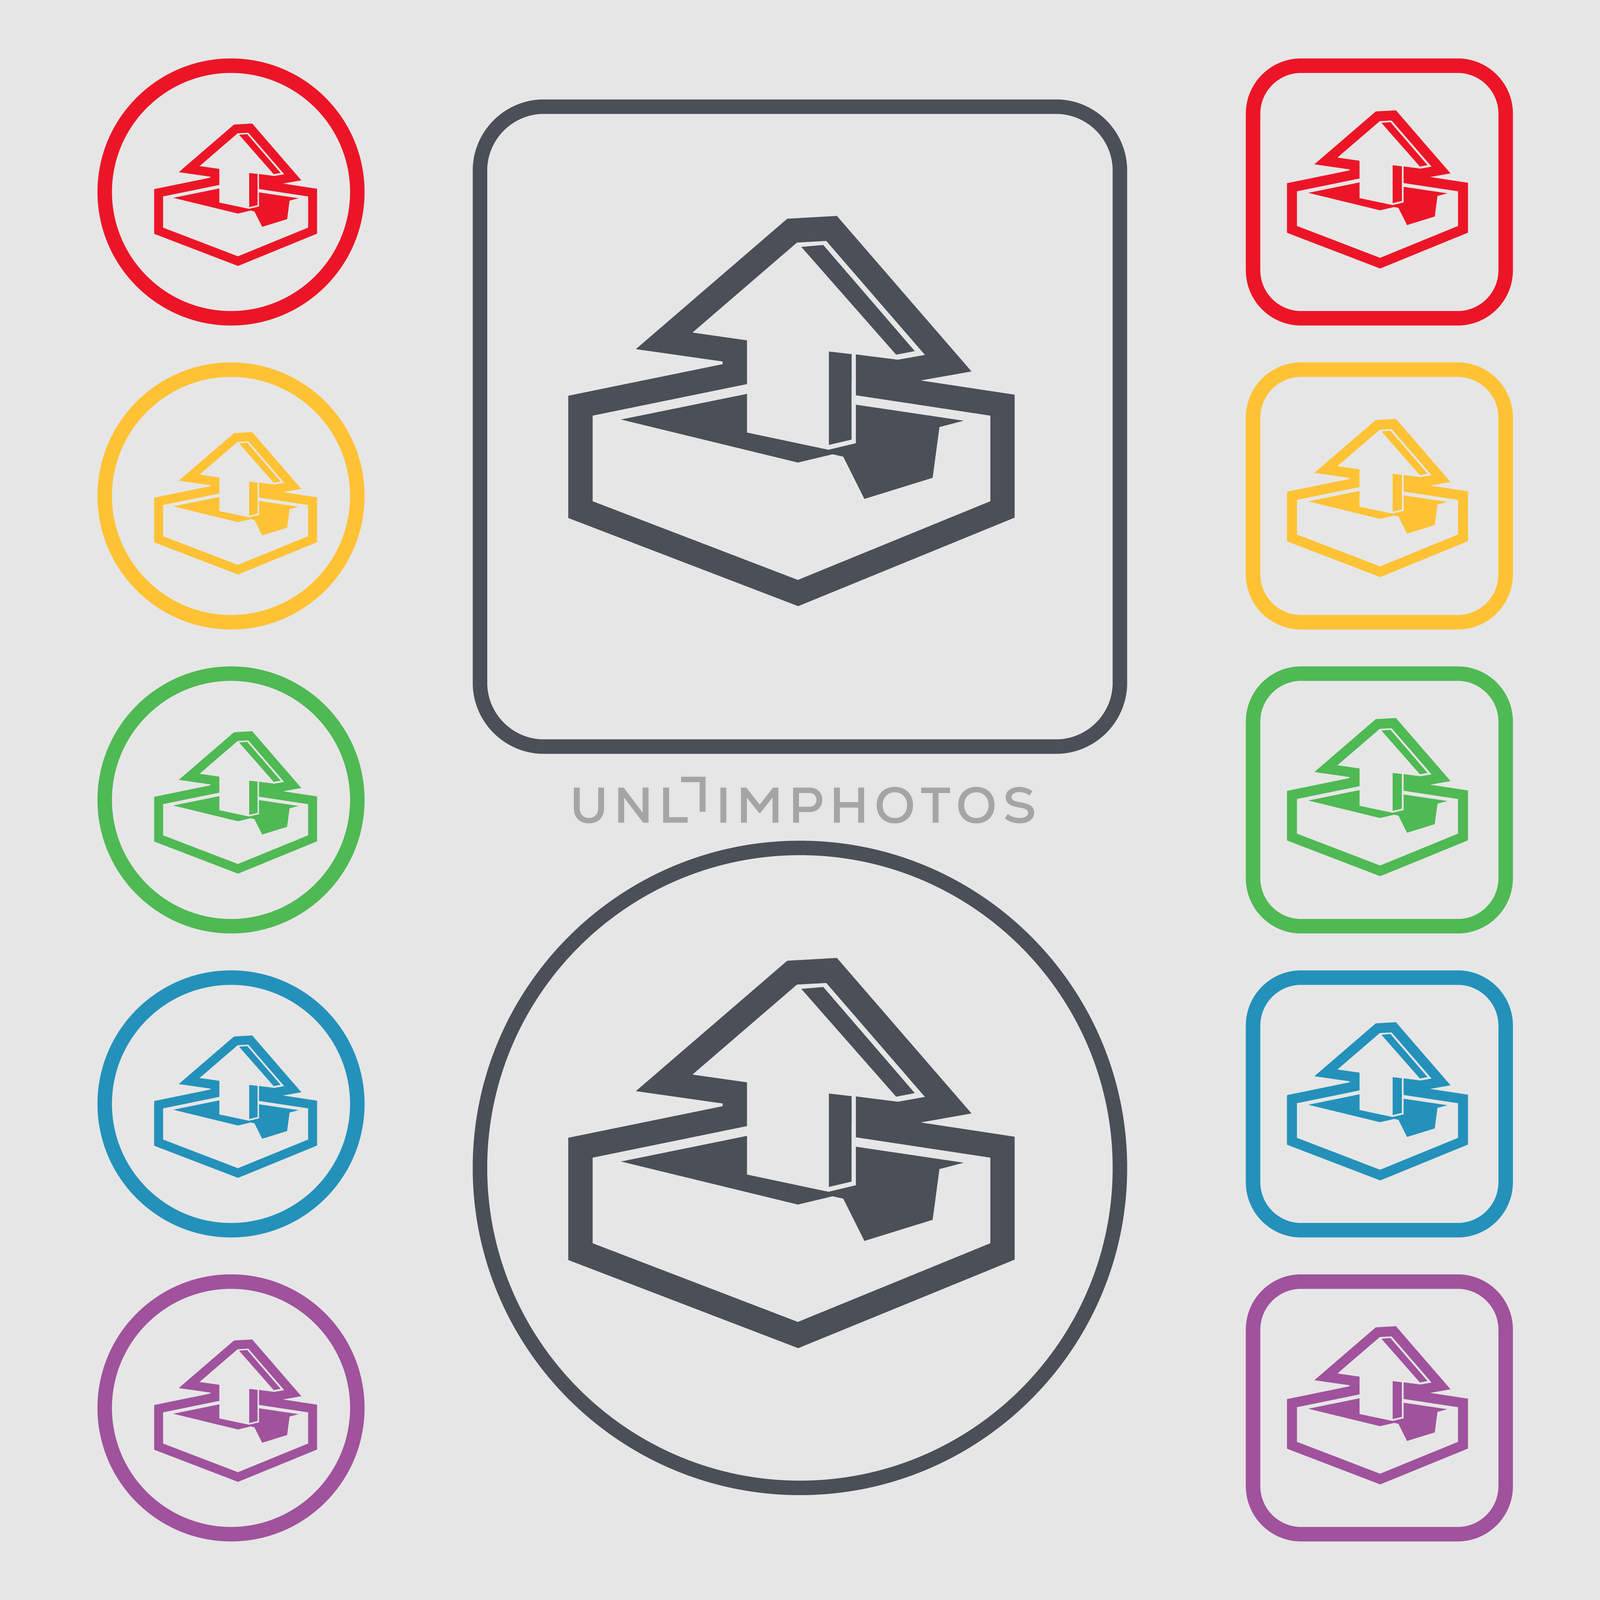 Upload icon sign. symbol on the Round and square buttons with frame. illustration